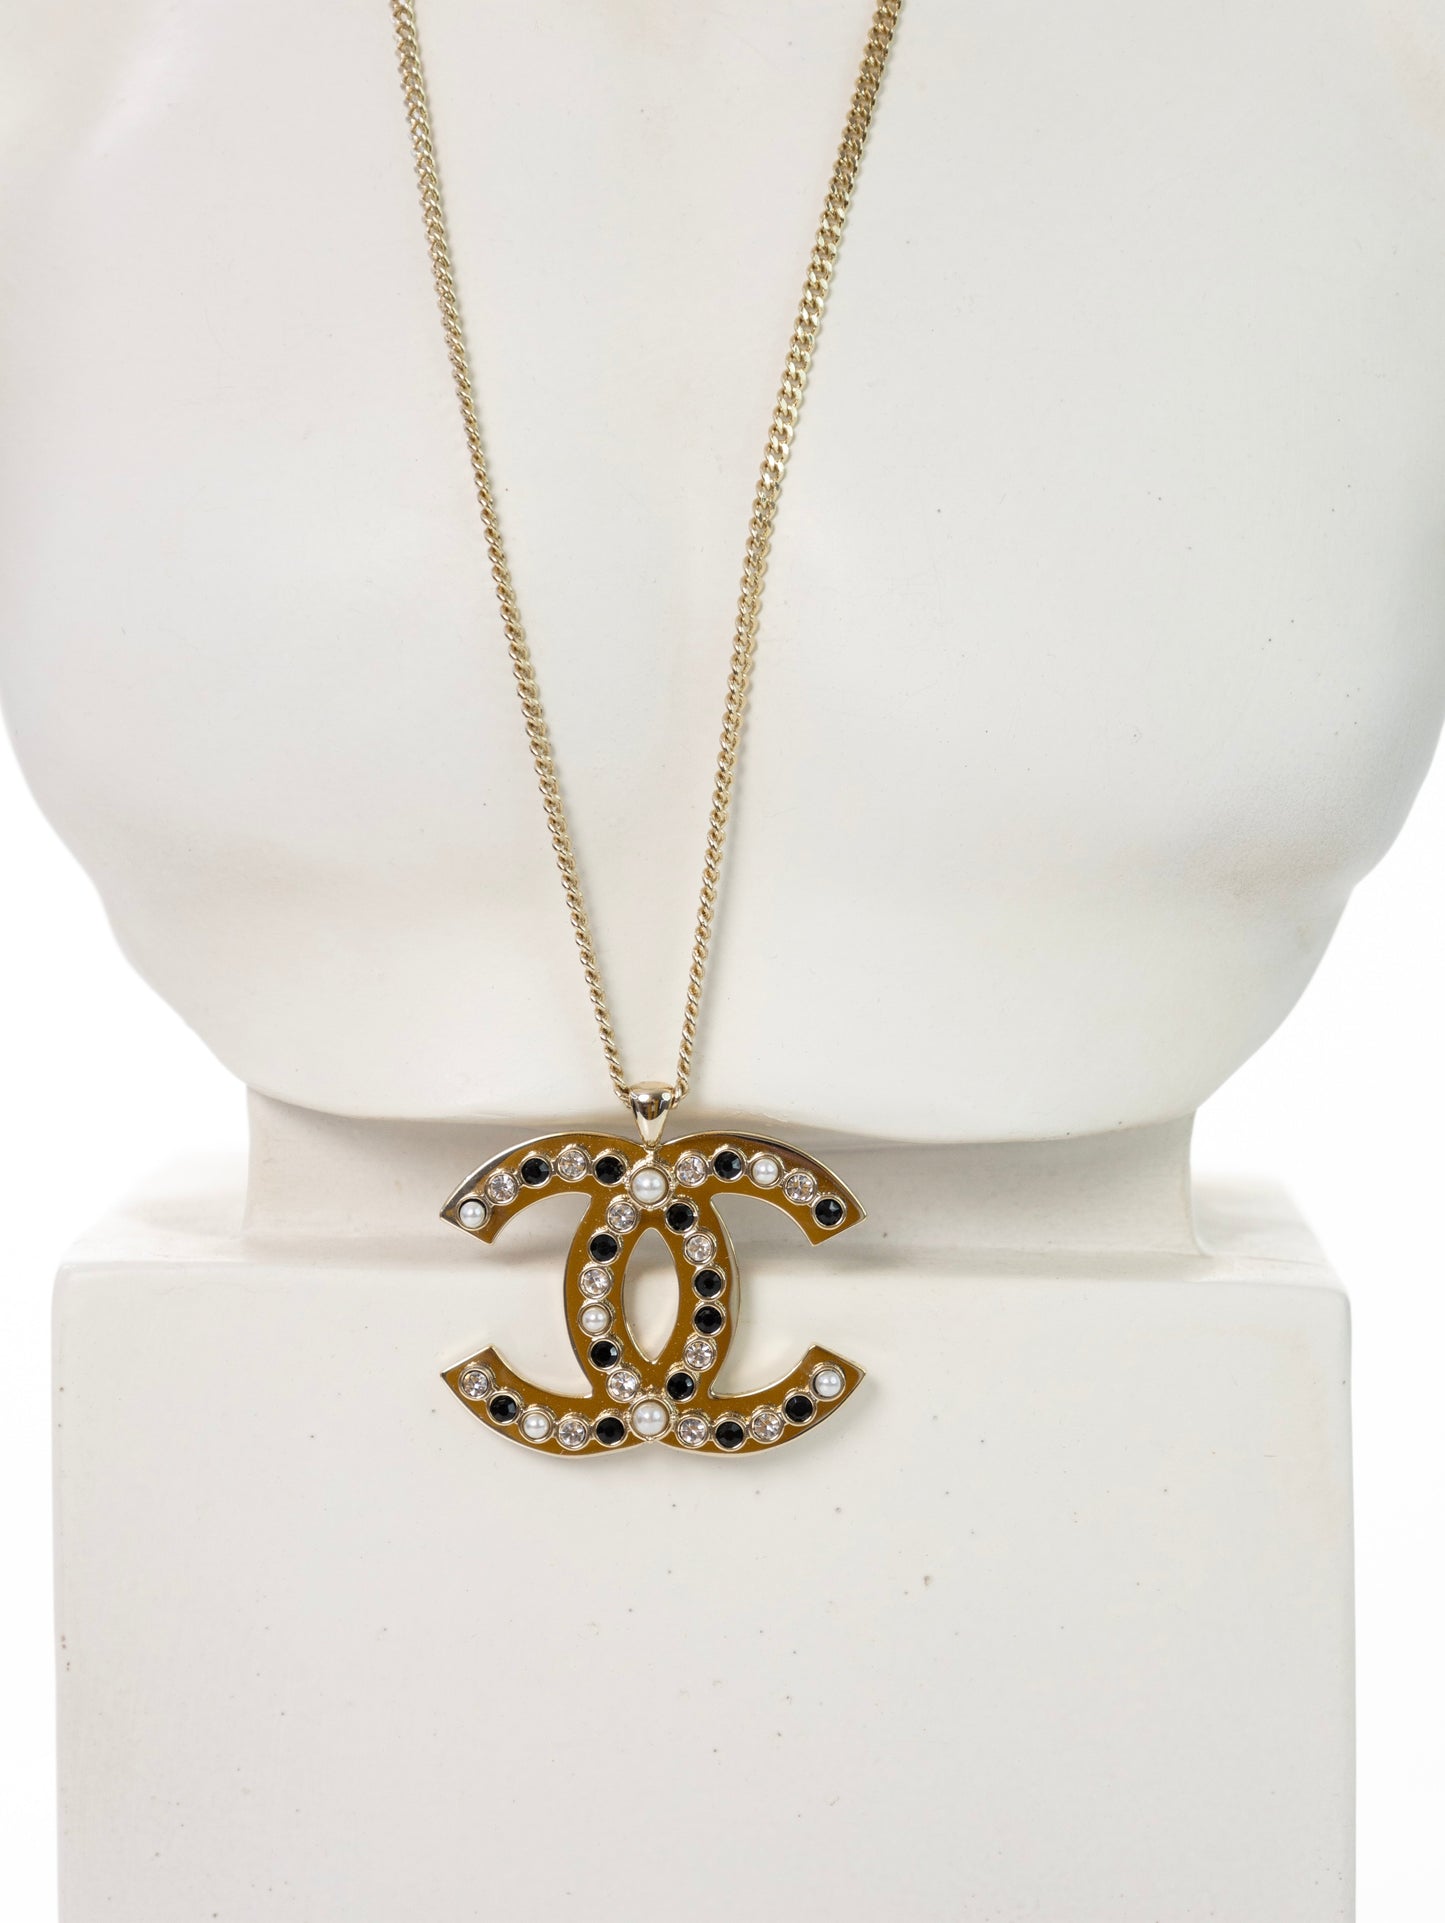 CHANEL necklace long gold chain with XXL CC